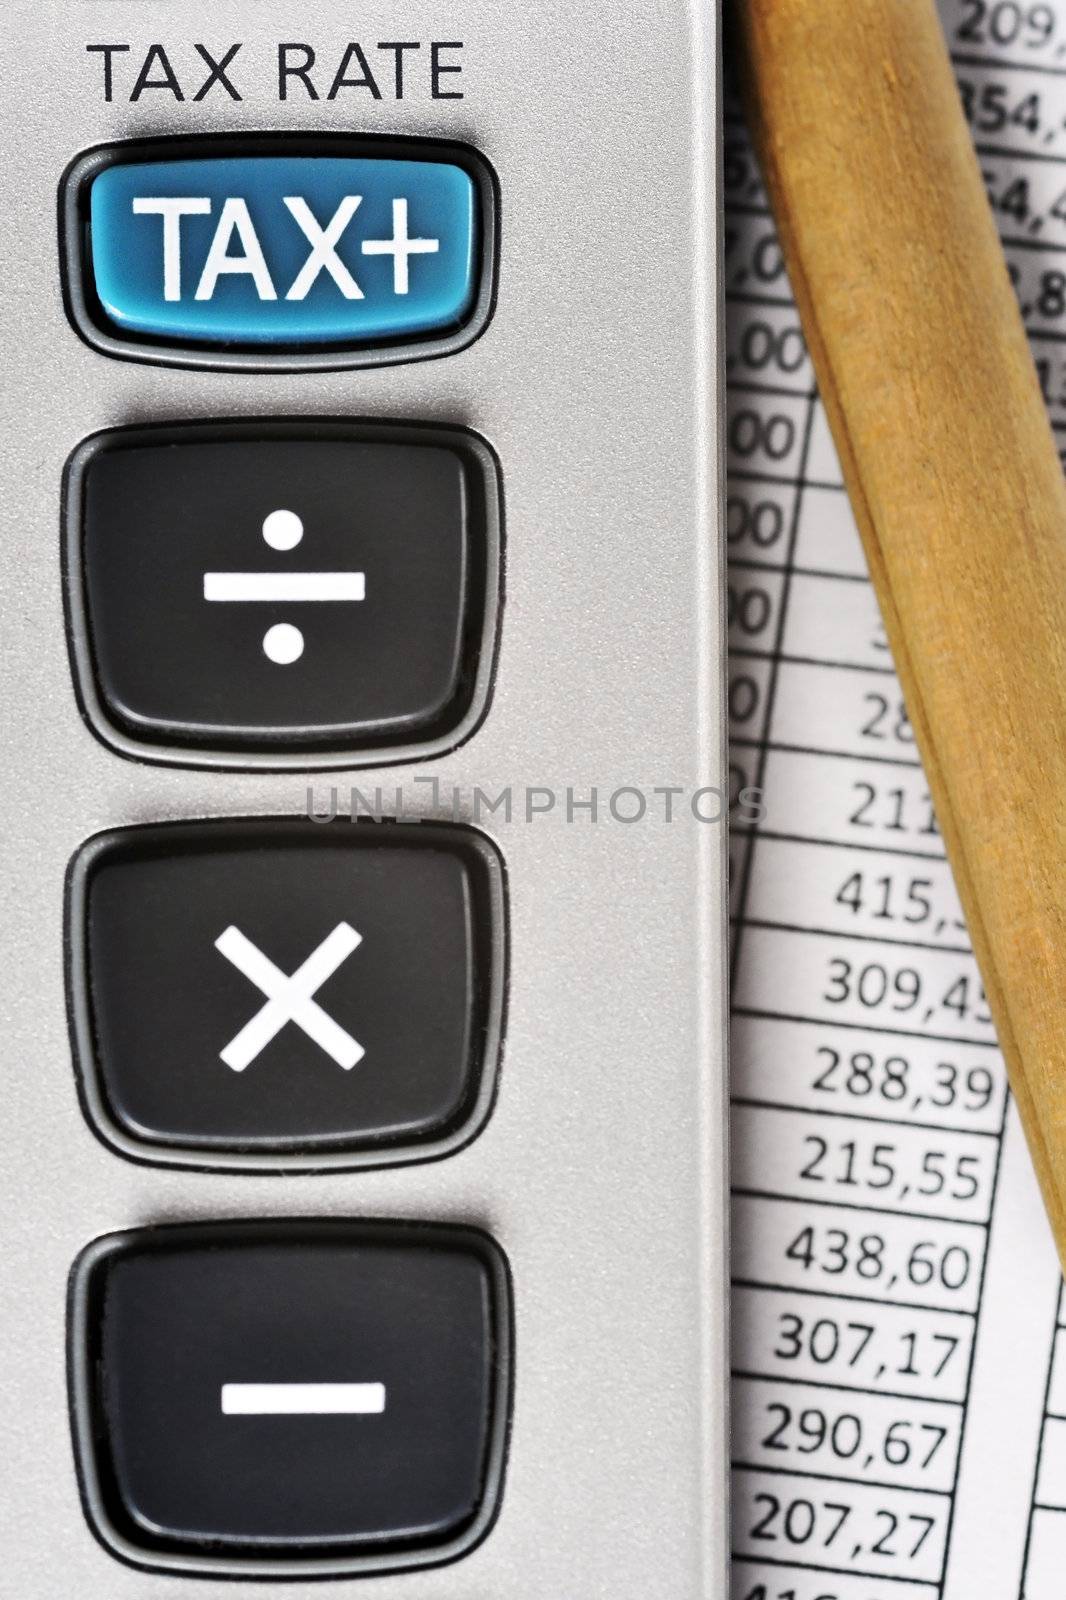 Detail of calculator, focusing the TAX key, next to a sheet of paper with numbers and a pencil.